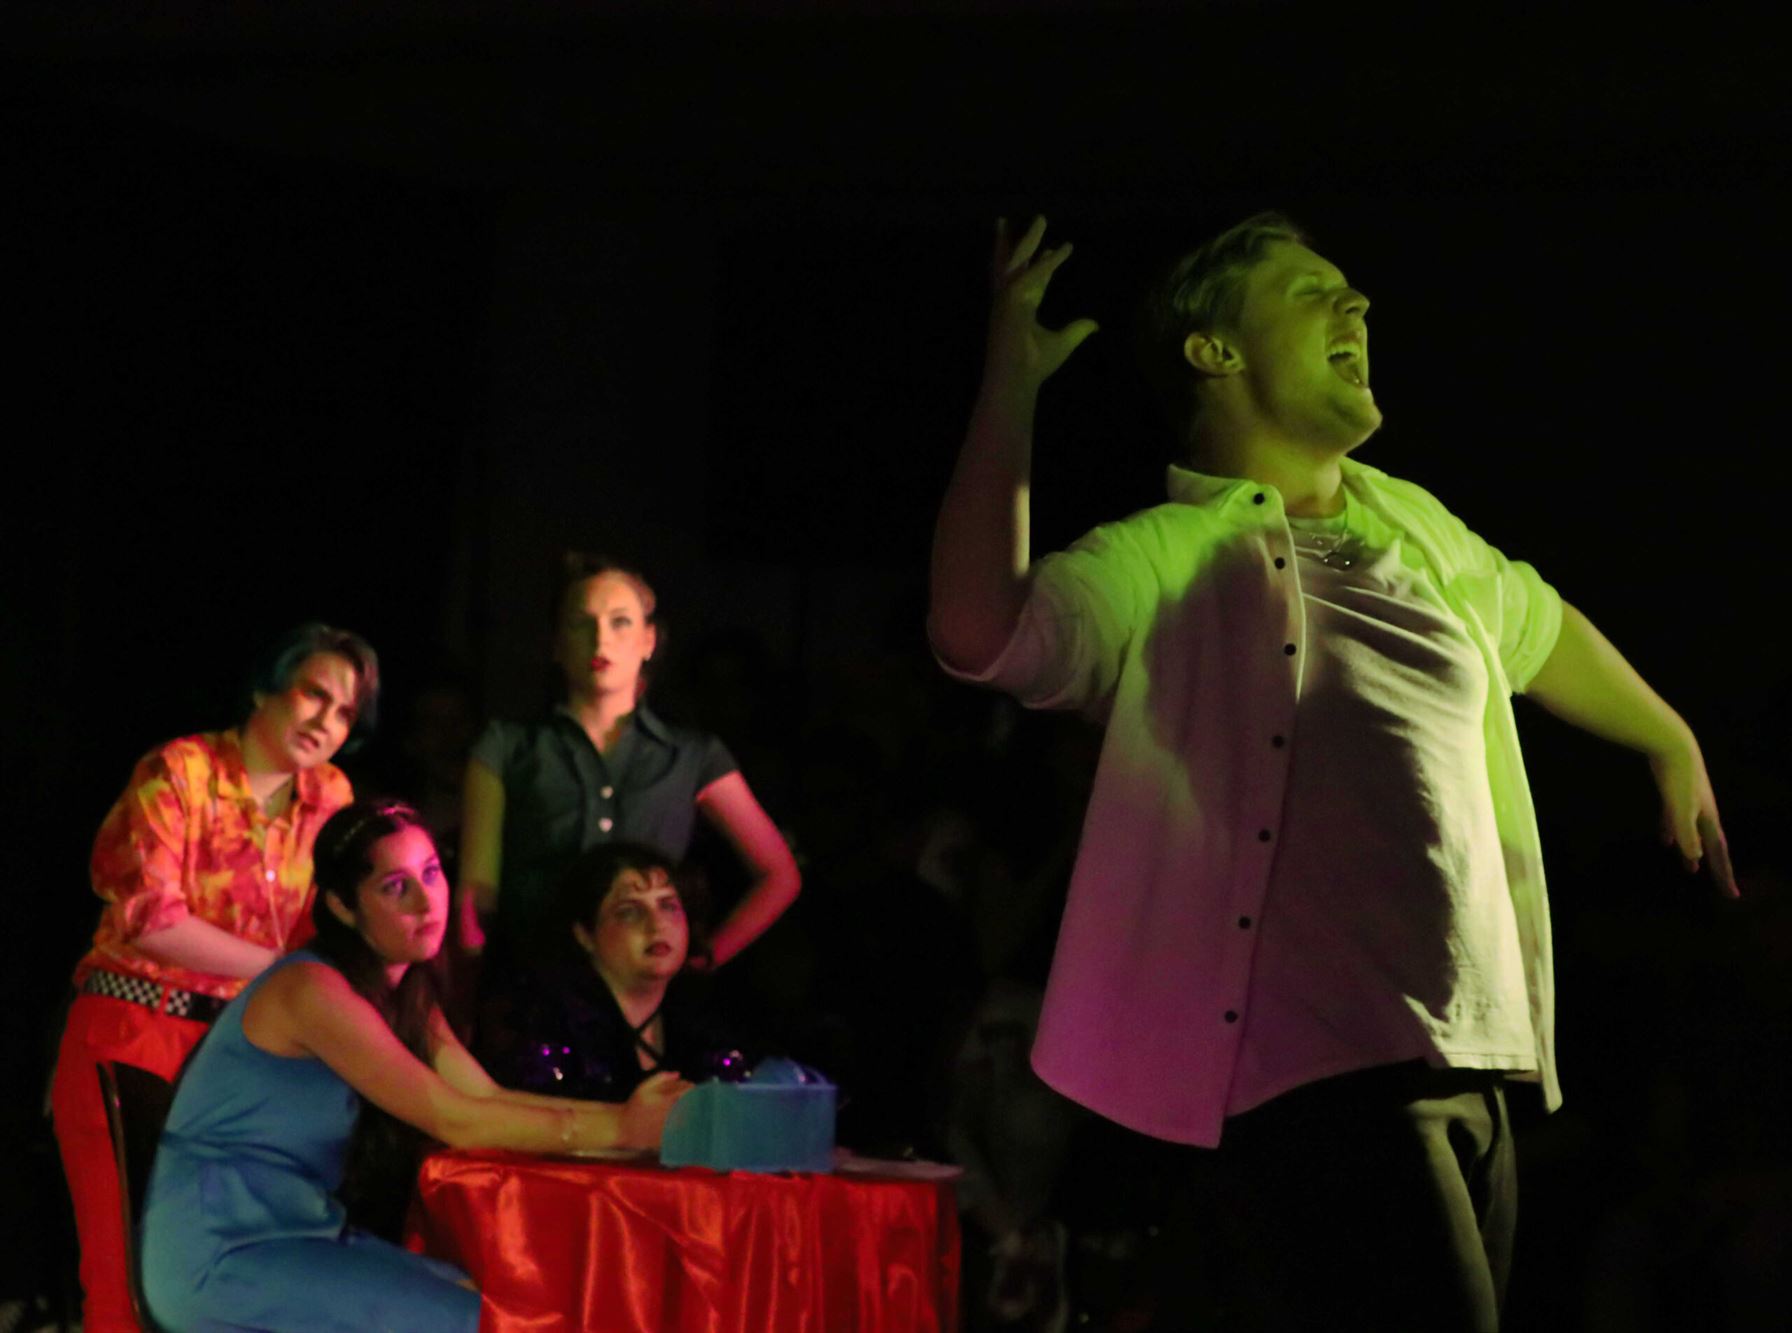 "Adam" played by Ian Love, performs a solo with fellow cast members Lea Dempsey, Stephanie Blais, Kayleigh Cole, and Beck Roth in the background. Victoria Howell | The Montclarion